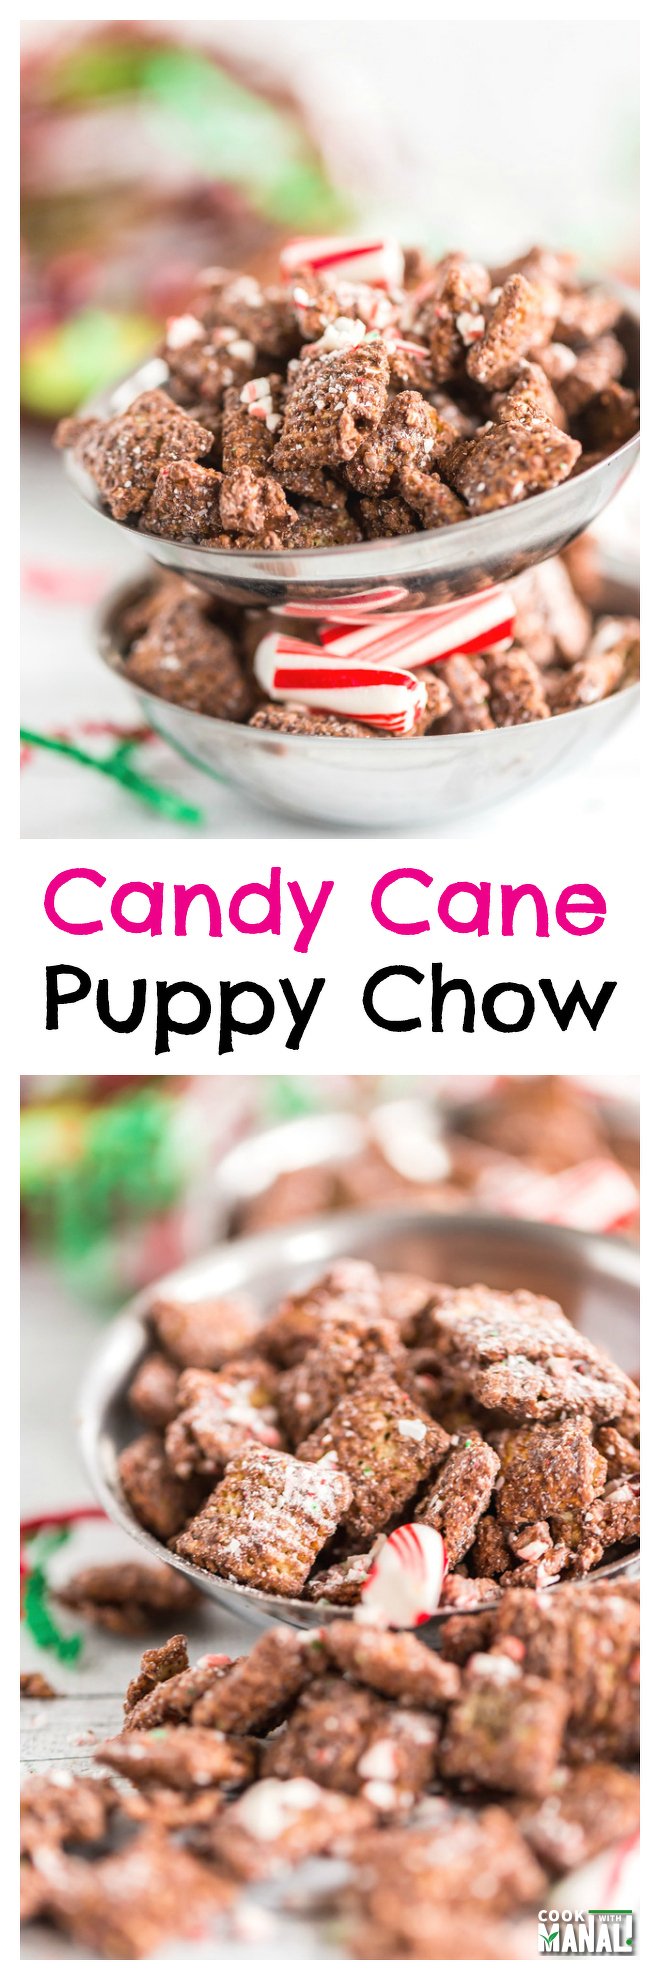 Candy Cane Puppy Chow Collage